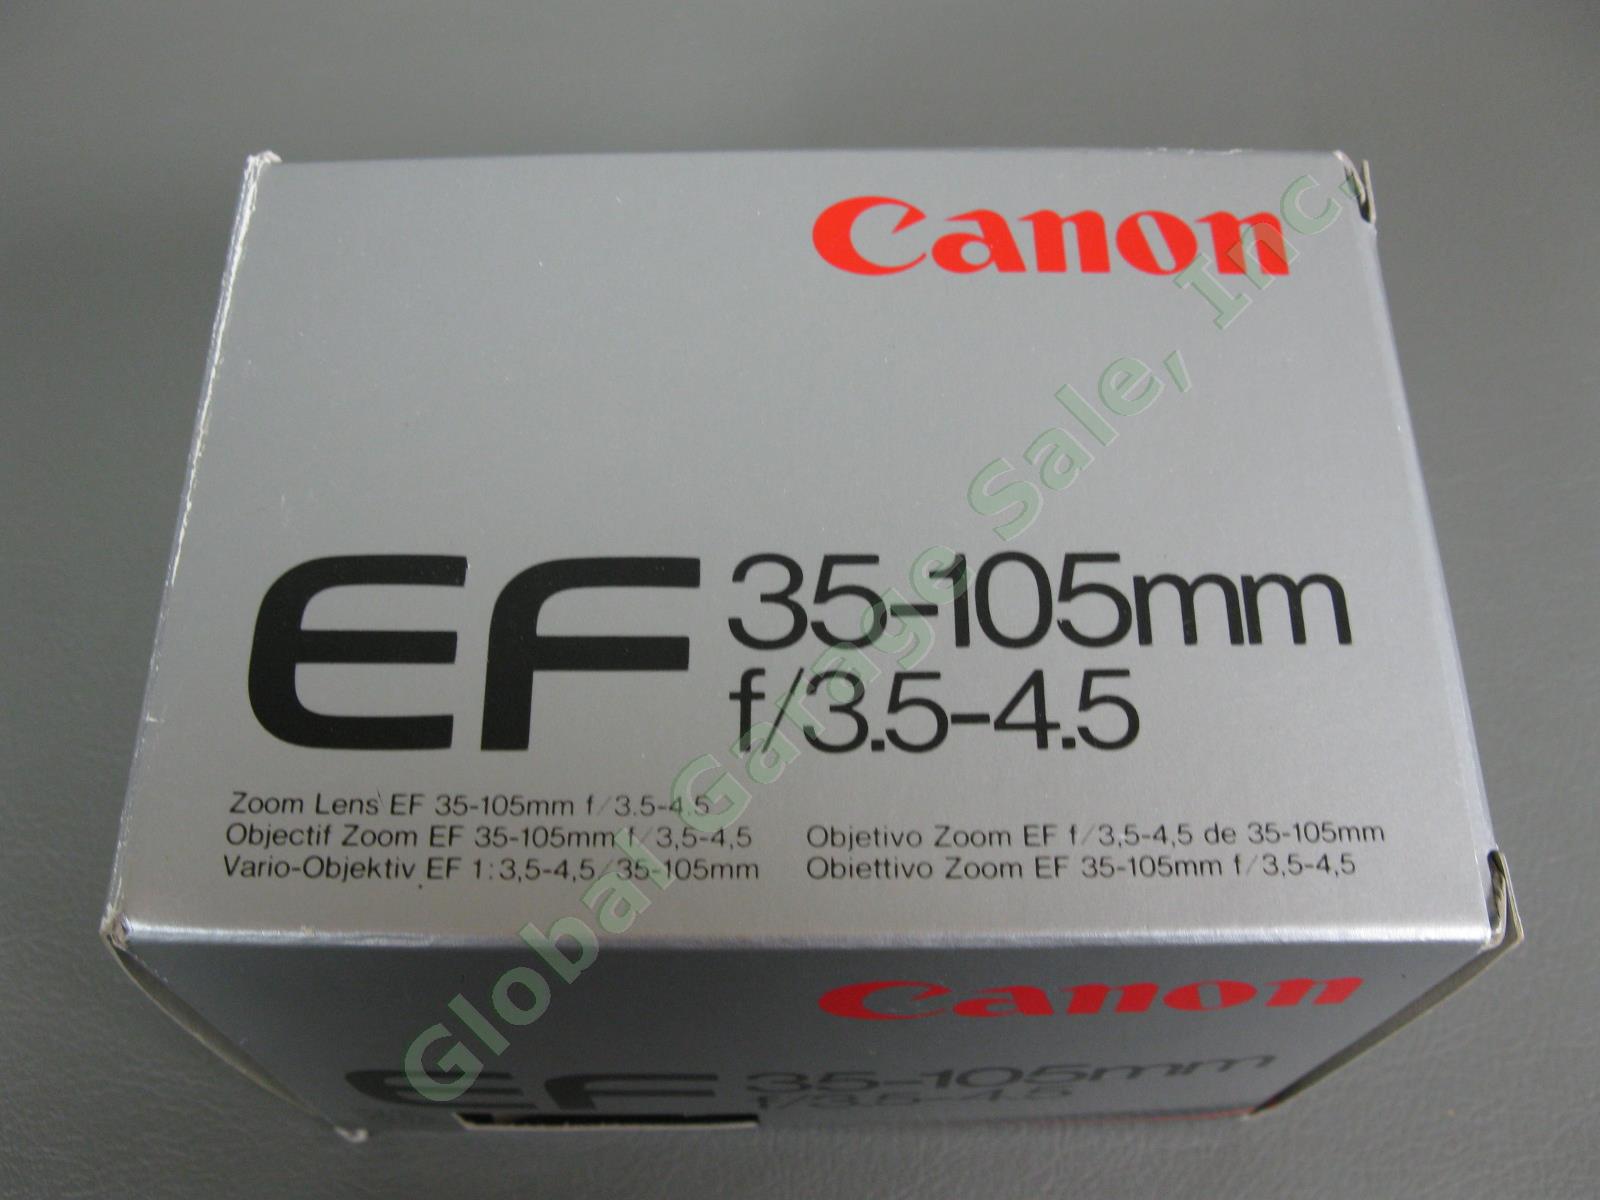 Excellent Condition Canon EF 35-105mm f/3.5-4.5 Zoom Camera Lens Covers Box NR 4